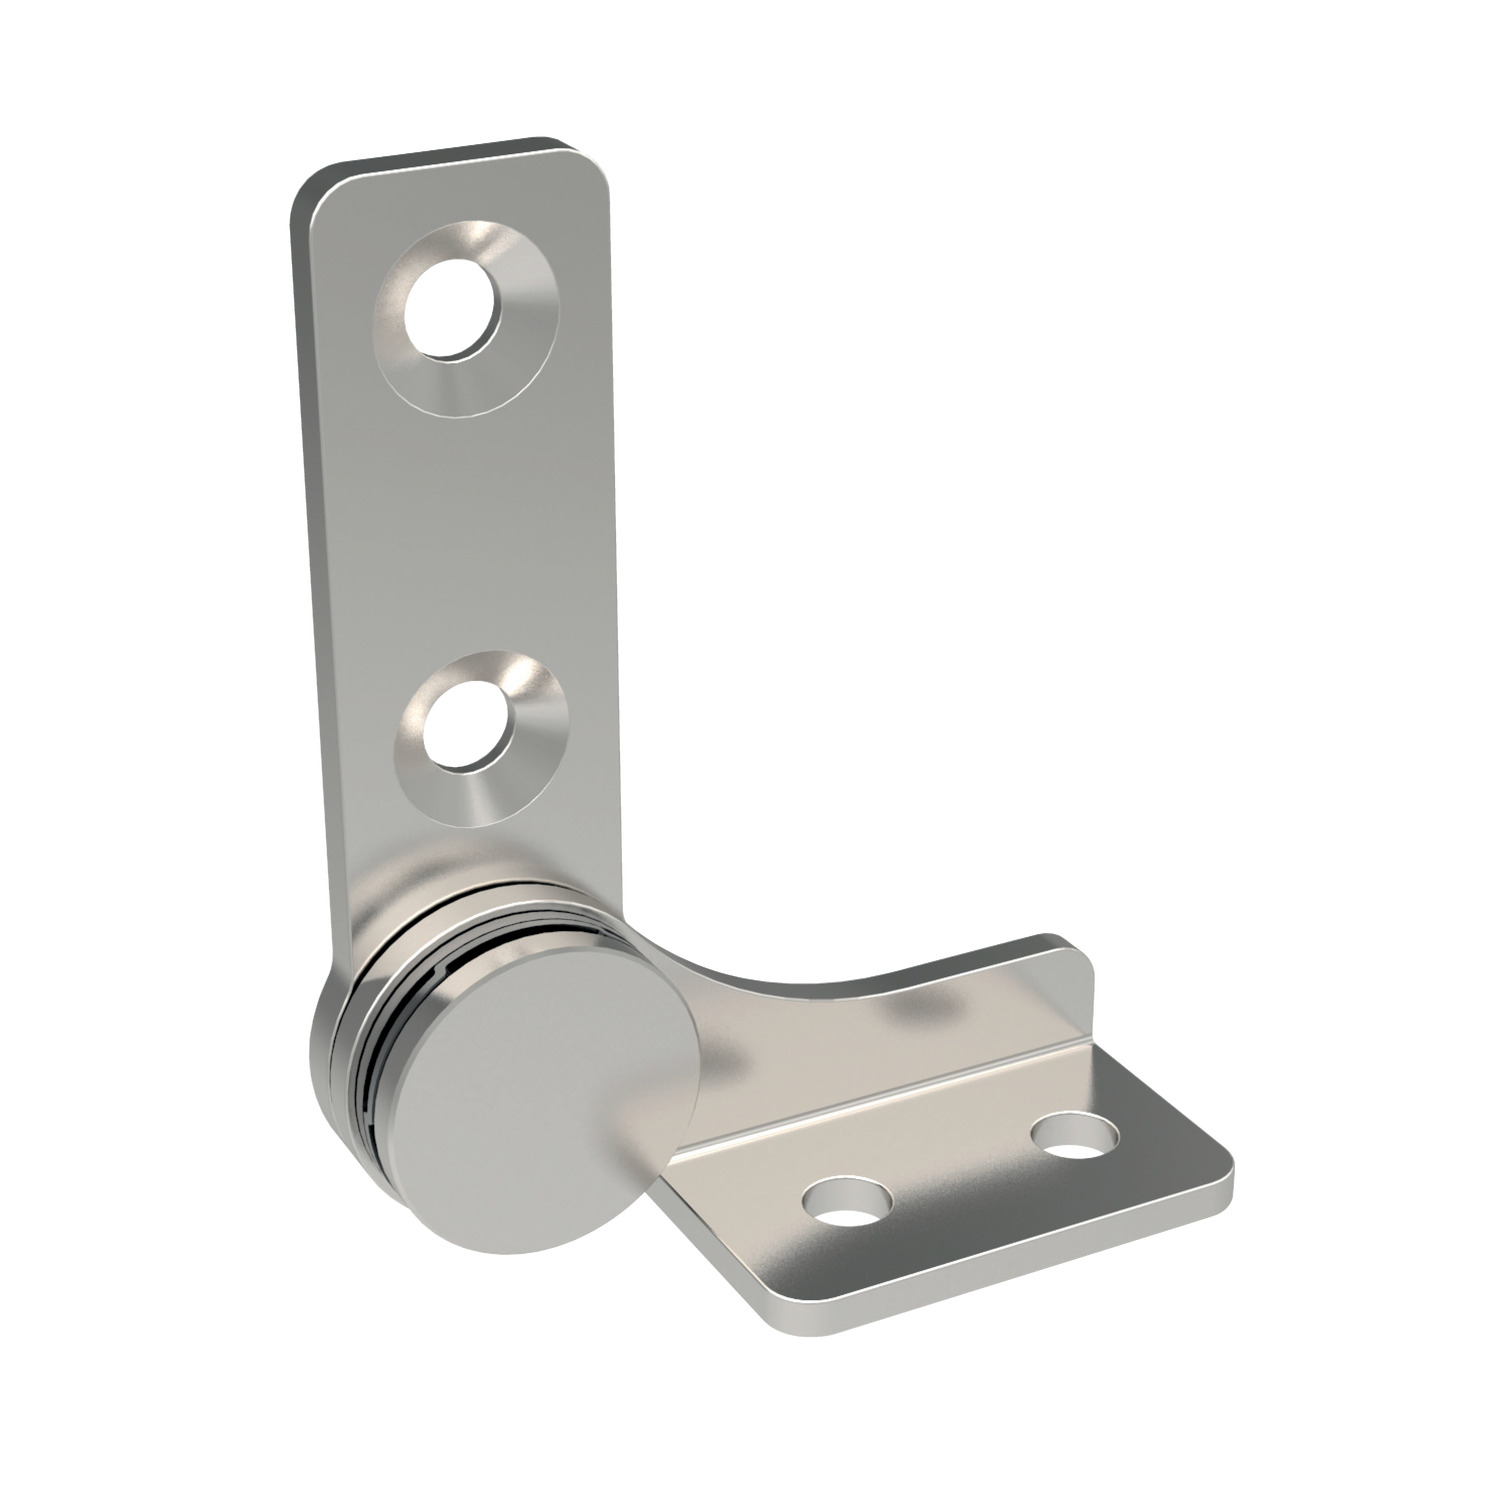 Constant Torque - Friction Torque Hinges Constant torque friction hinges made from stainless steel (AISI 430). Ideal for monitoring cameras, screen and other displays. Constant toque applies through free stop angle.